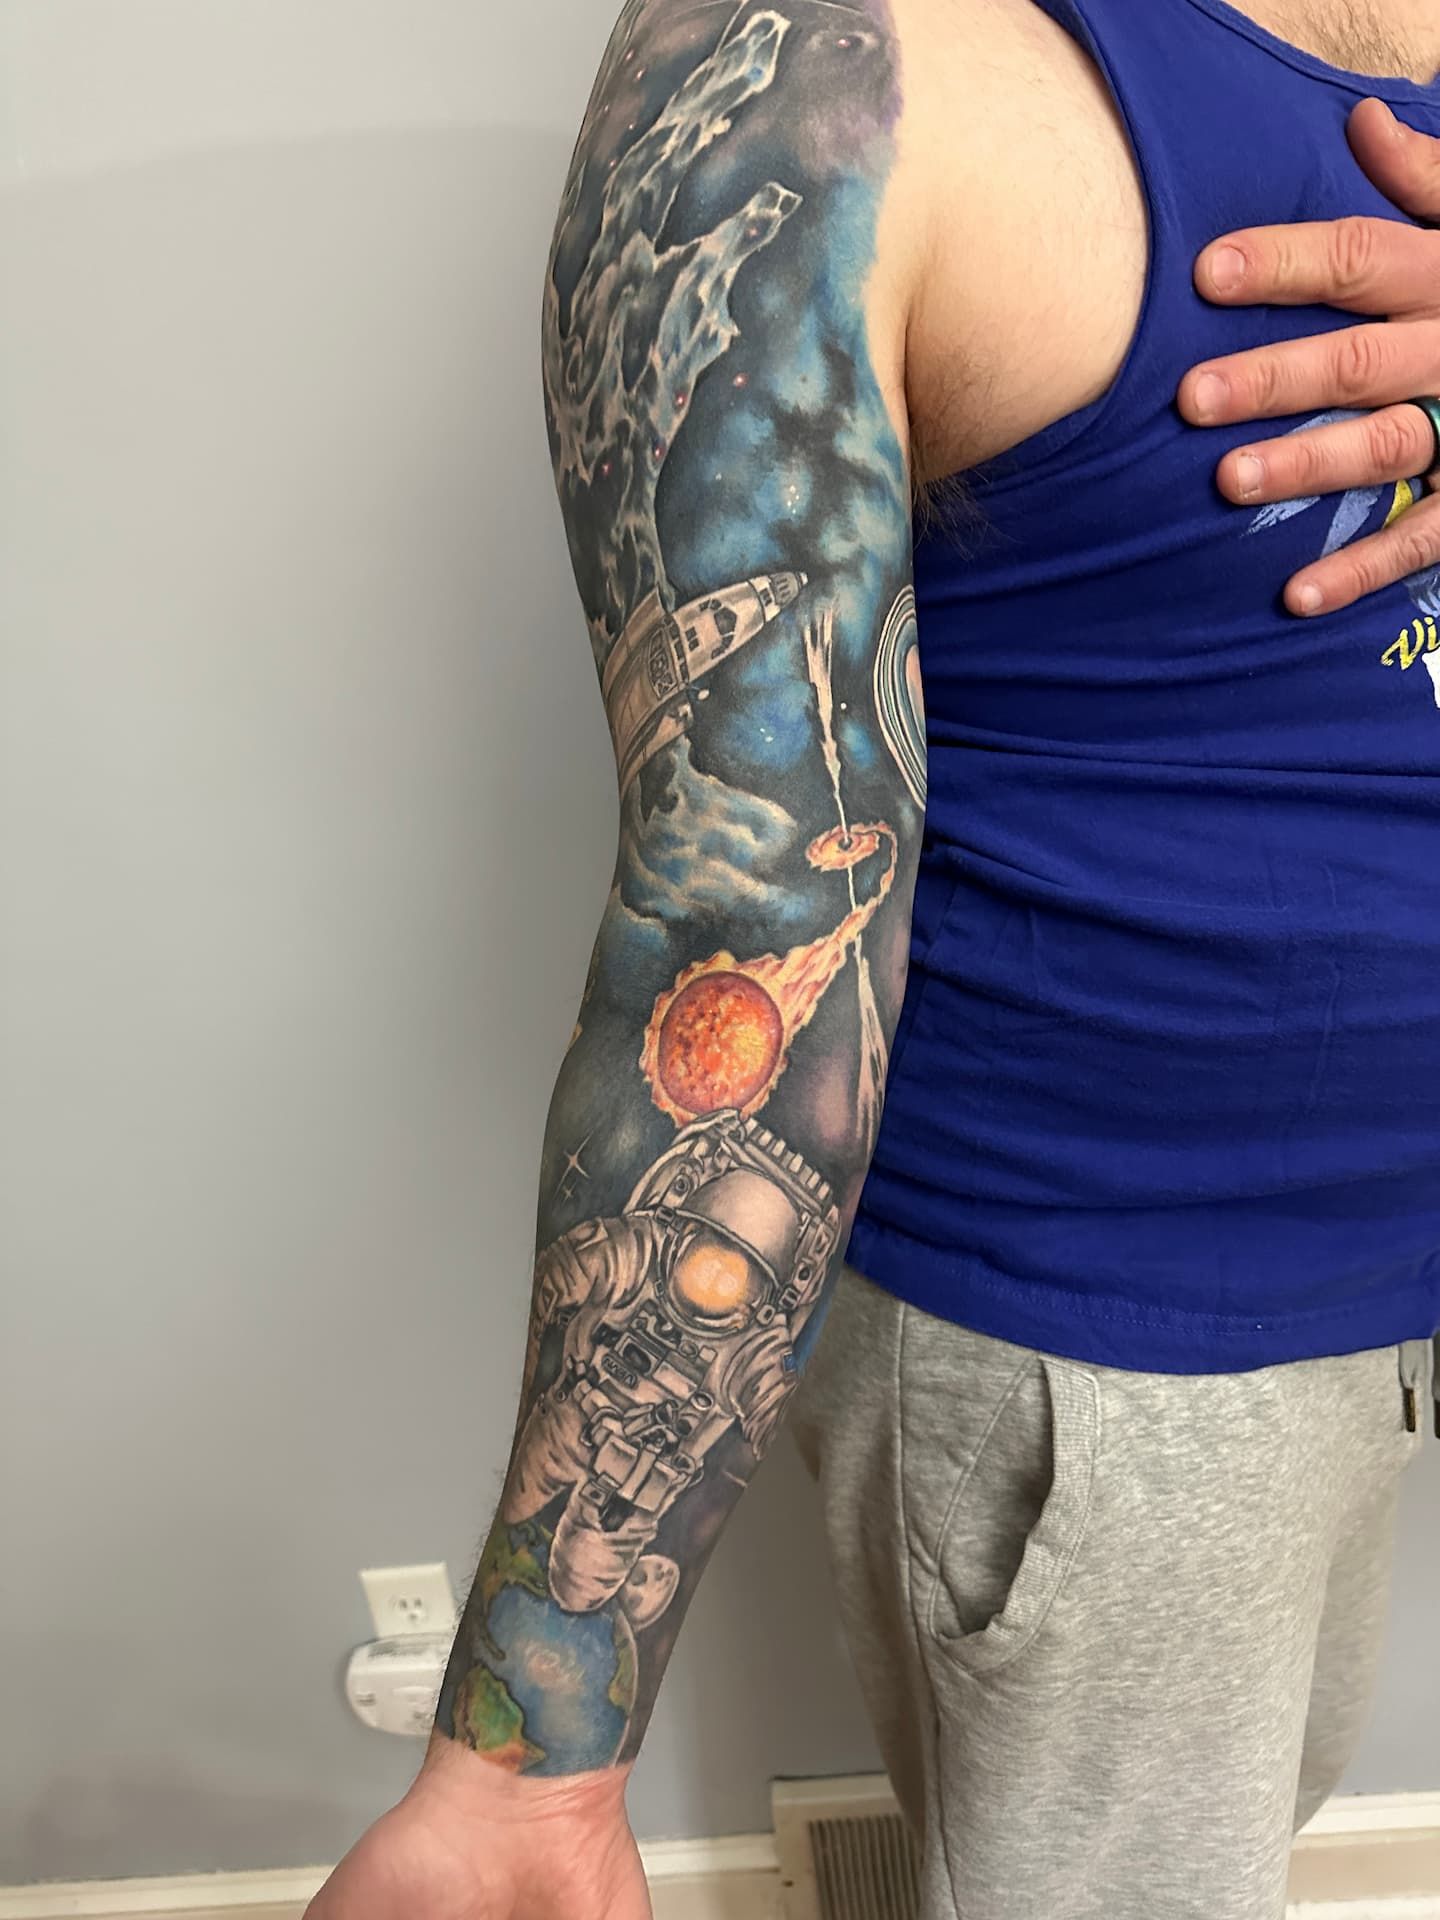 The inside of my sleeve featuring earth, an astronaut, and a type 1a supernova